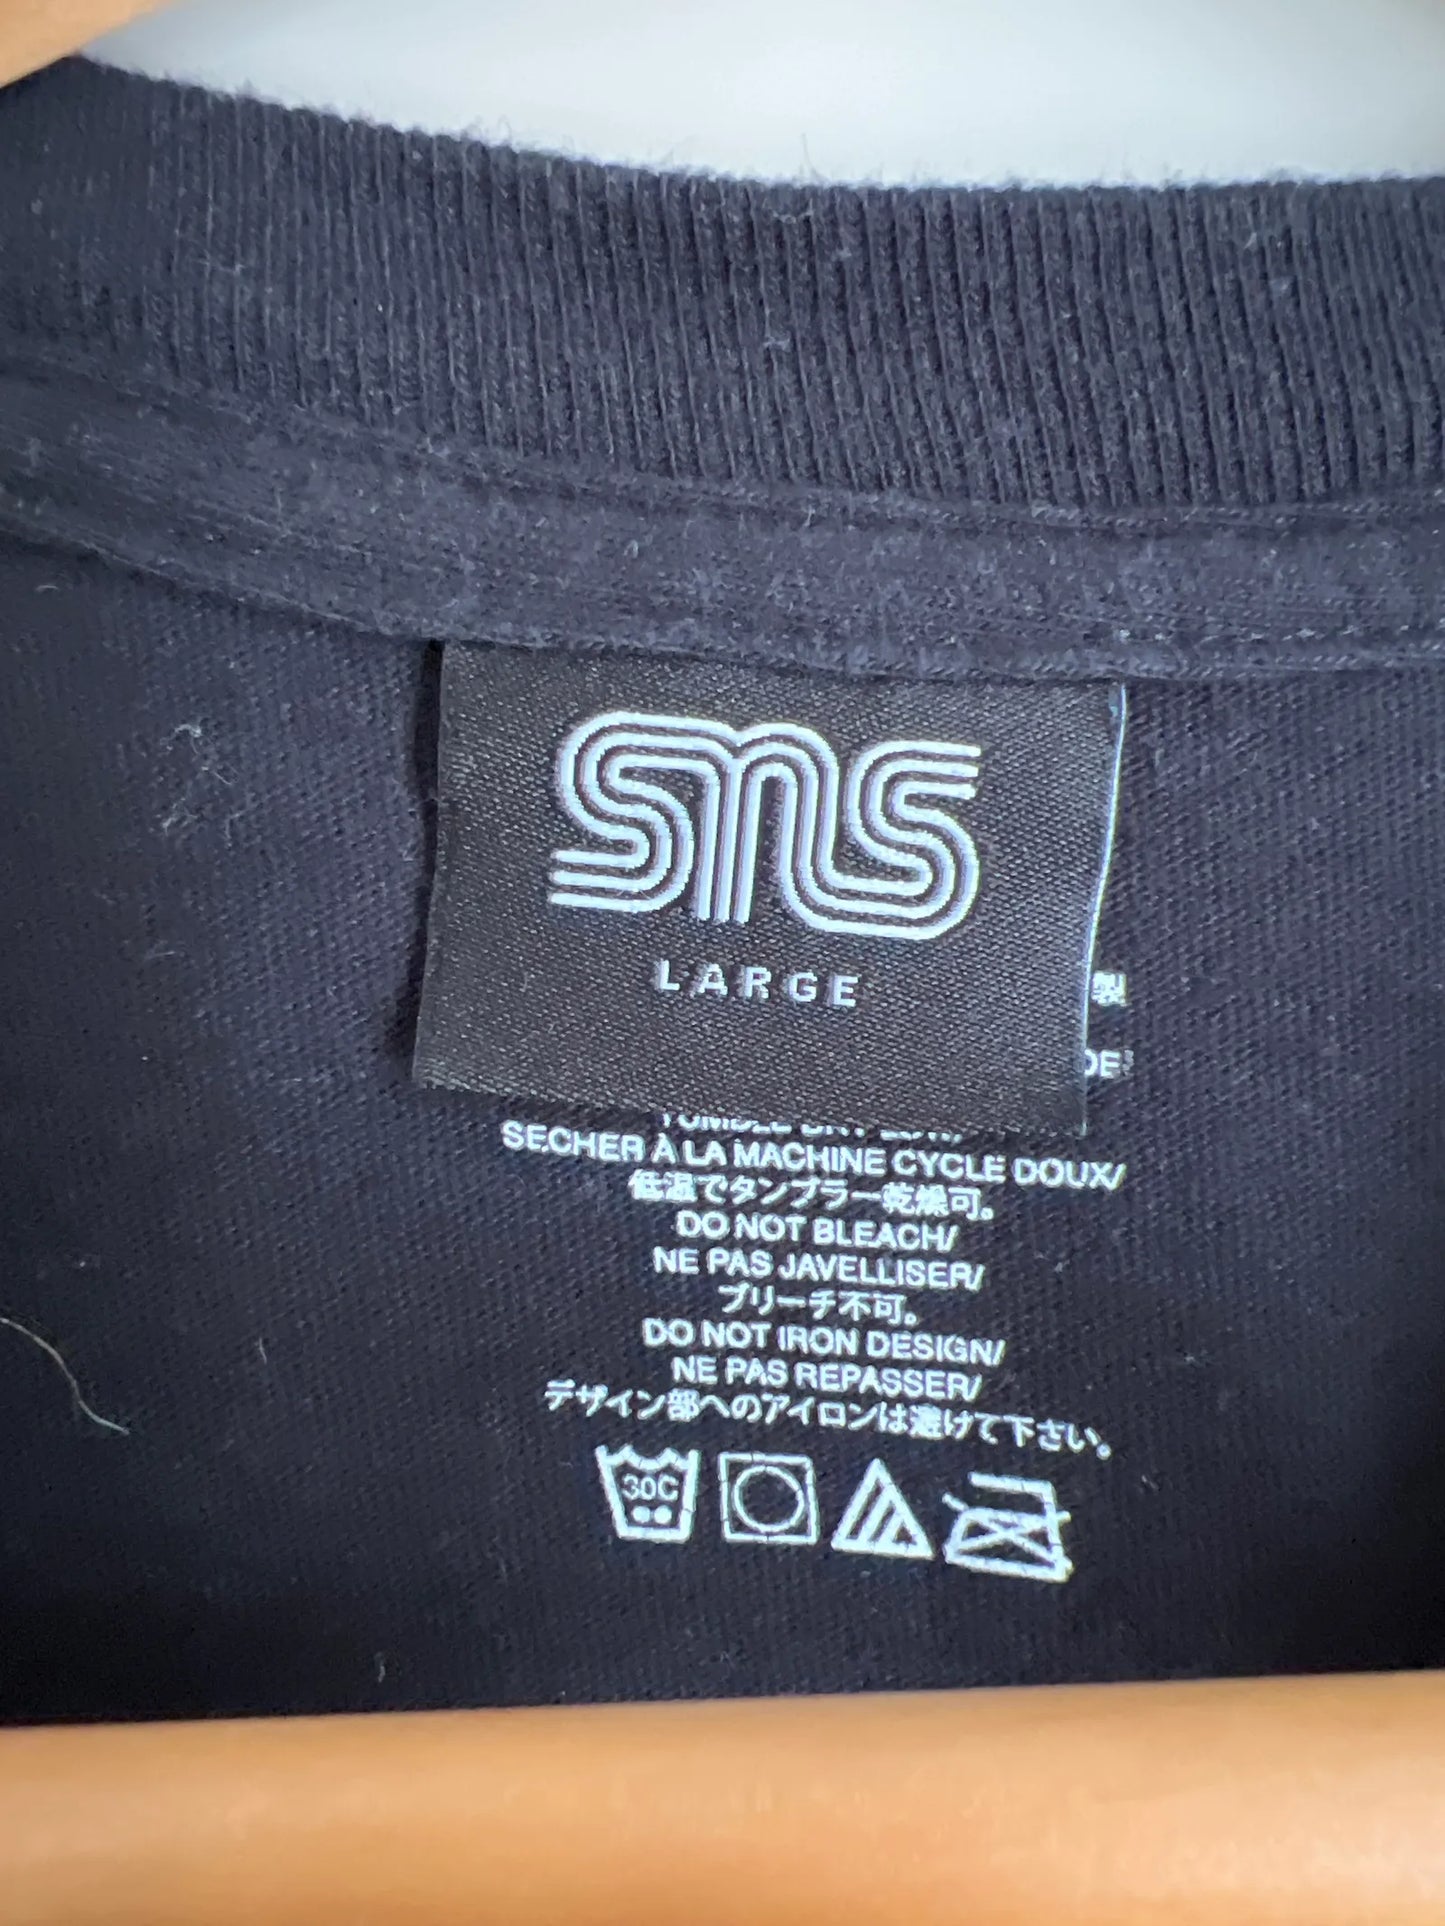 Sneakers And Stuff (SNS)-t-shirt